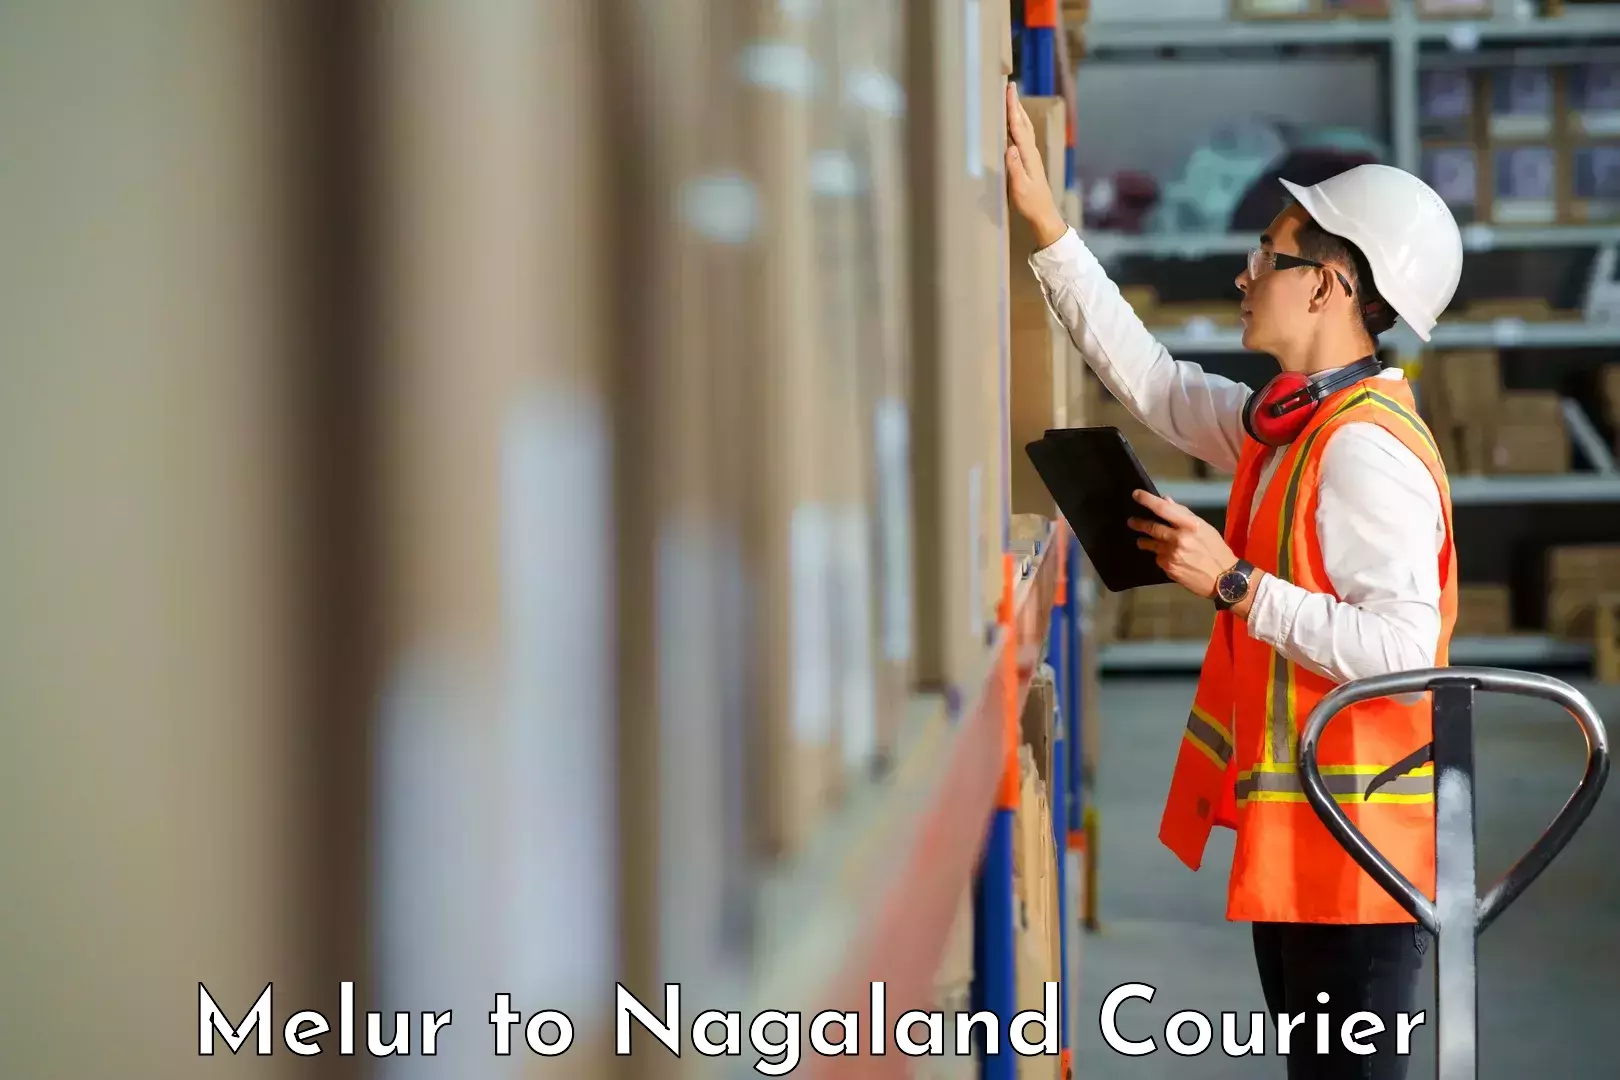 Advanced shipping network Melur to Nagaland